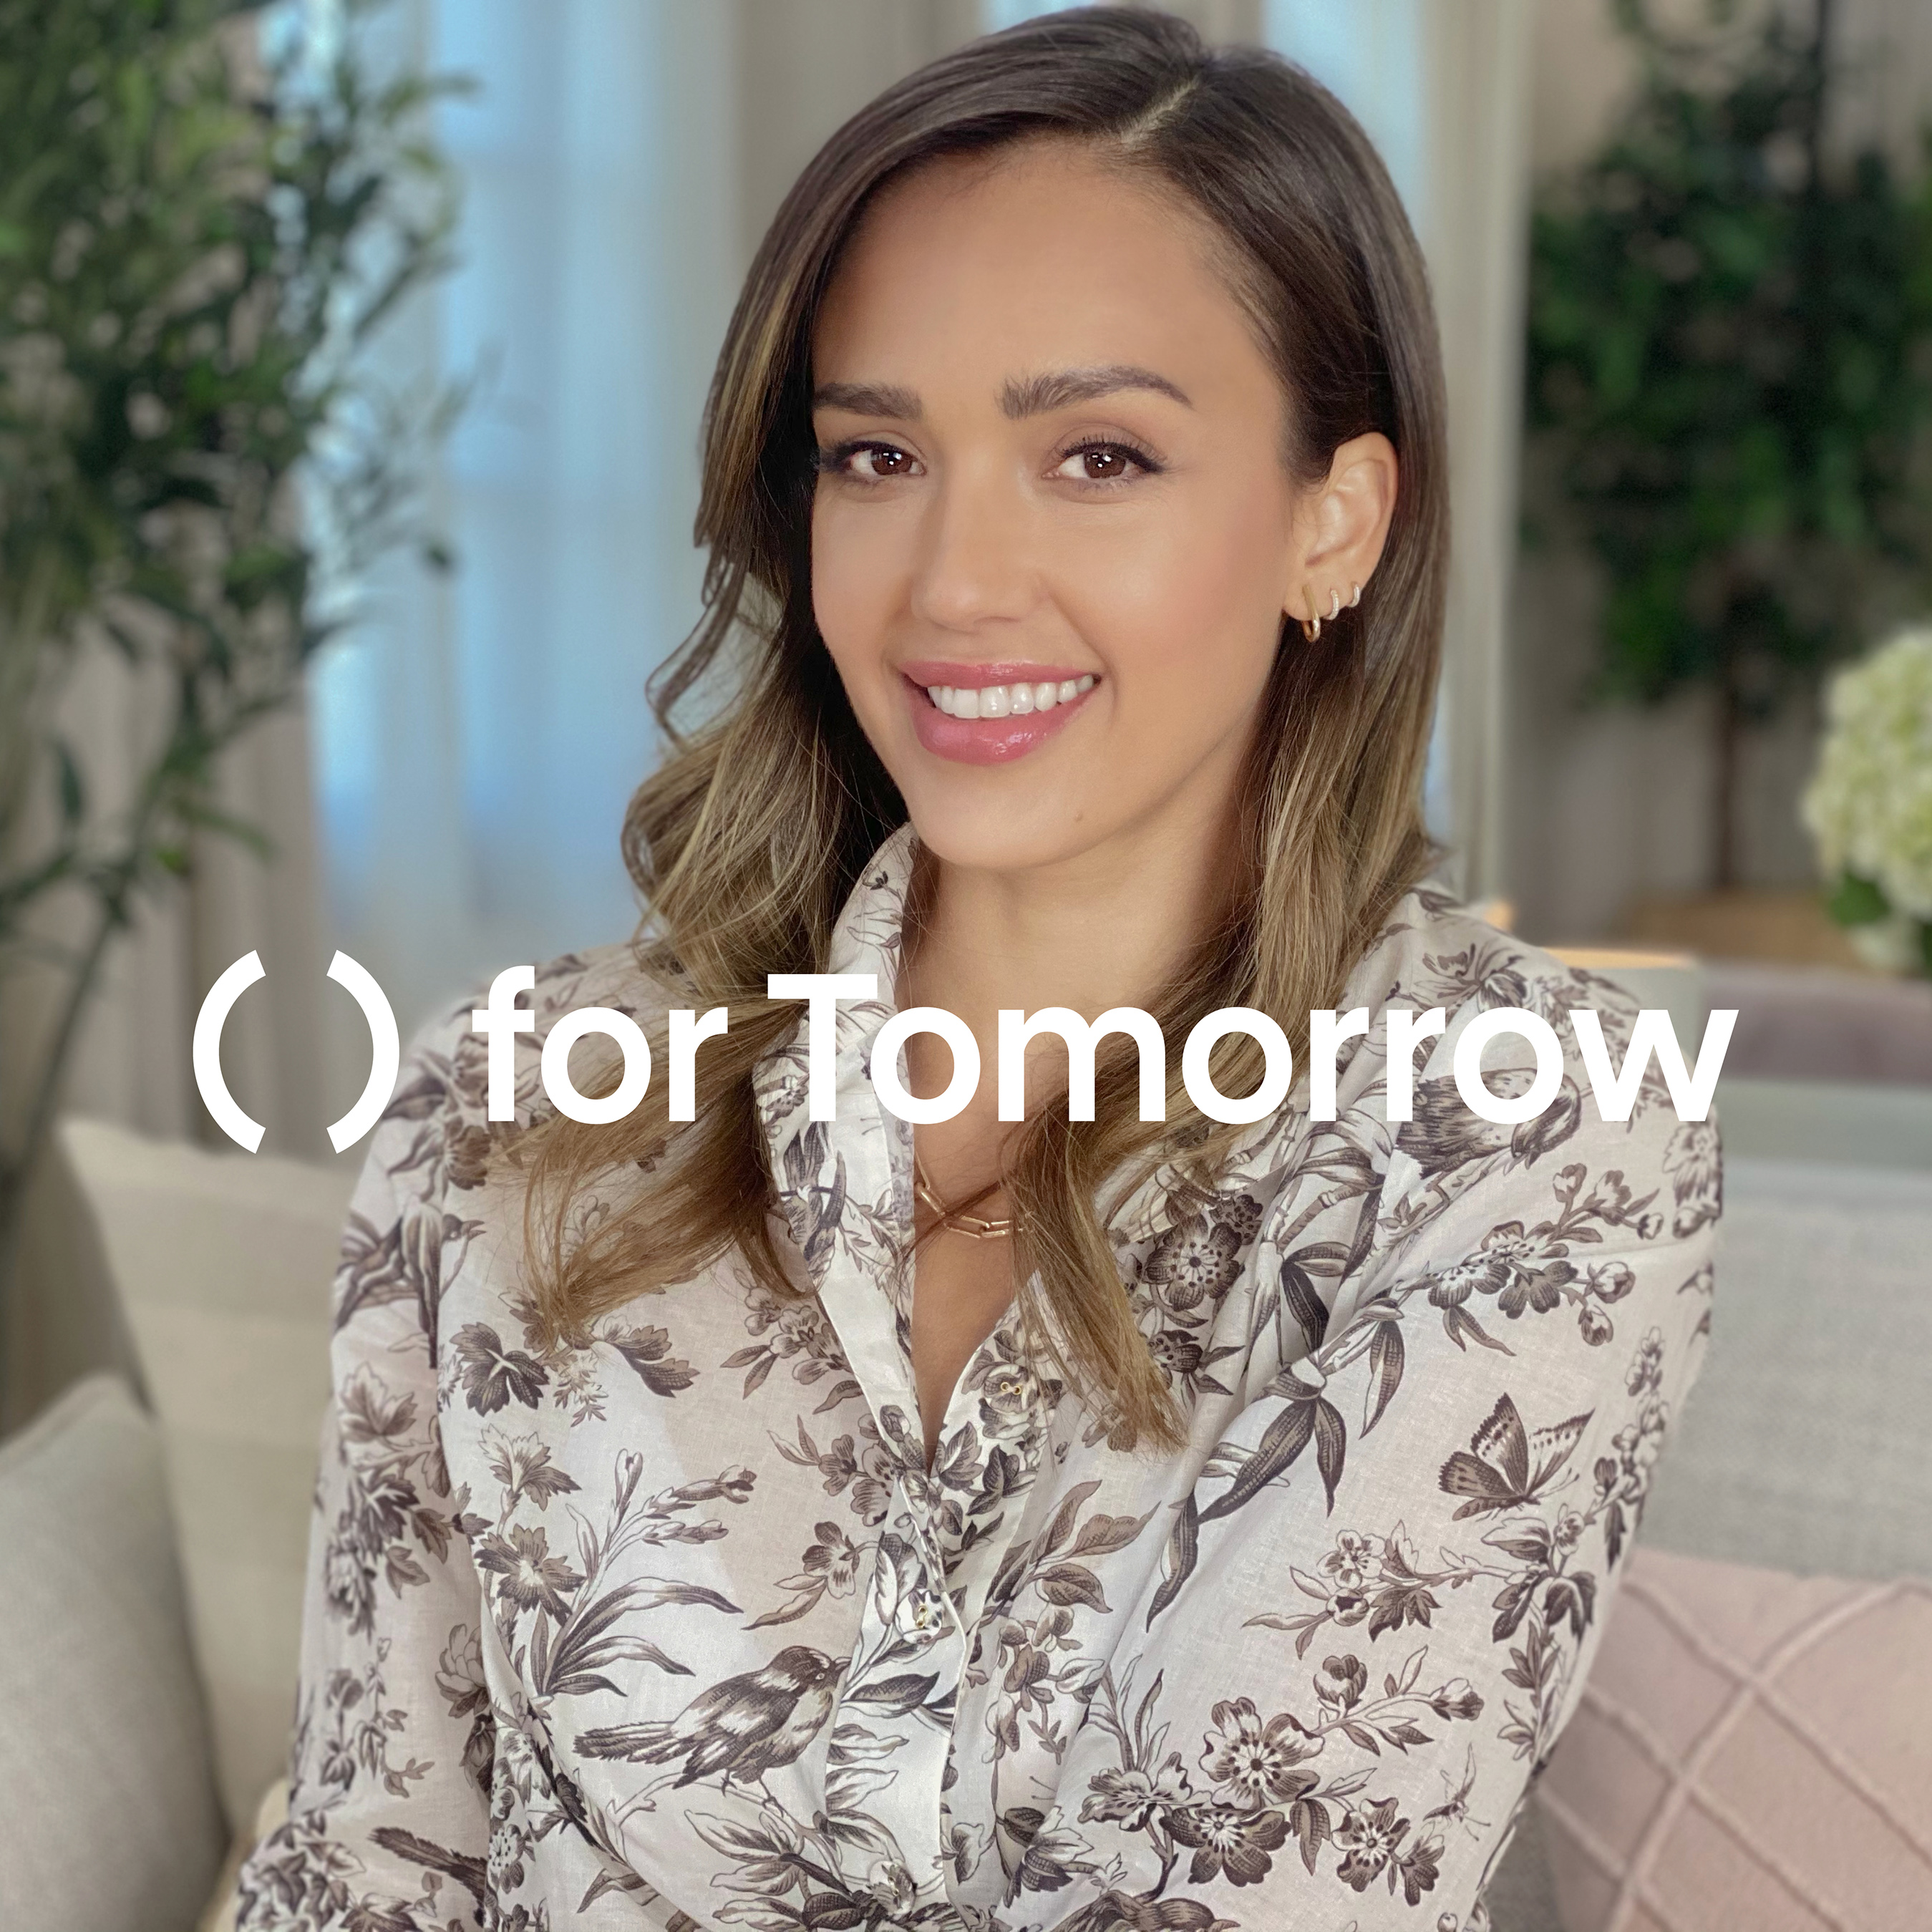 Hyundai Motor and UNDP Accelerator Labs jointly released a video featuring sustainable solutions submitted to the ?for Tomorrow' project, narrated by project ambassador Jessica Alba.